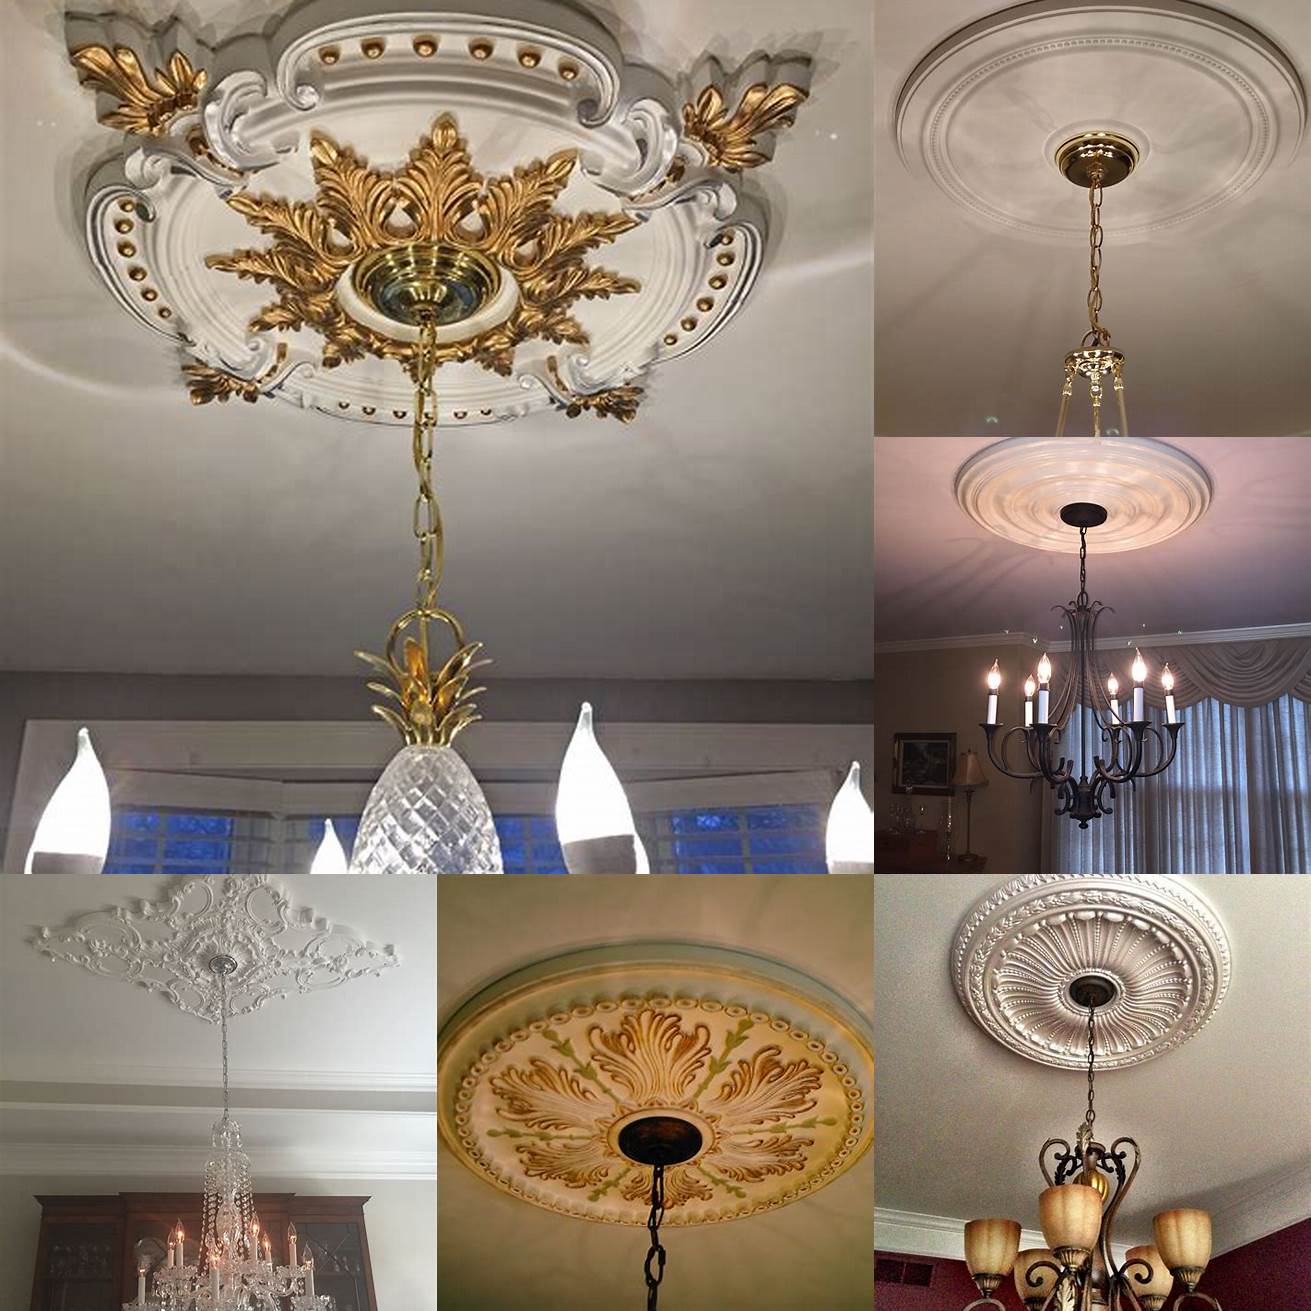 Ceiling medallions Ceiling medallions are decorative elements that can add texture and visual interest to your ceiling They can also be used to mount a chandelier or other hanging light fixture